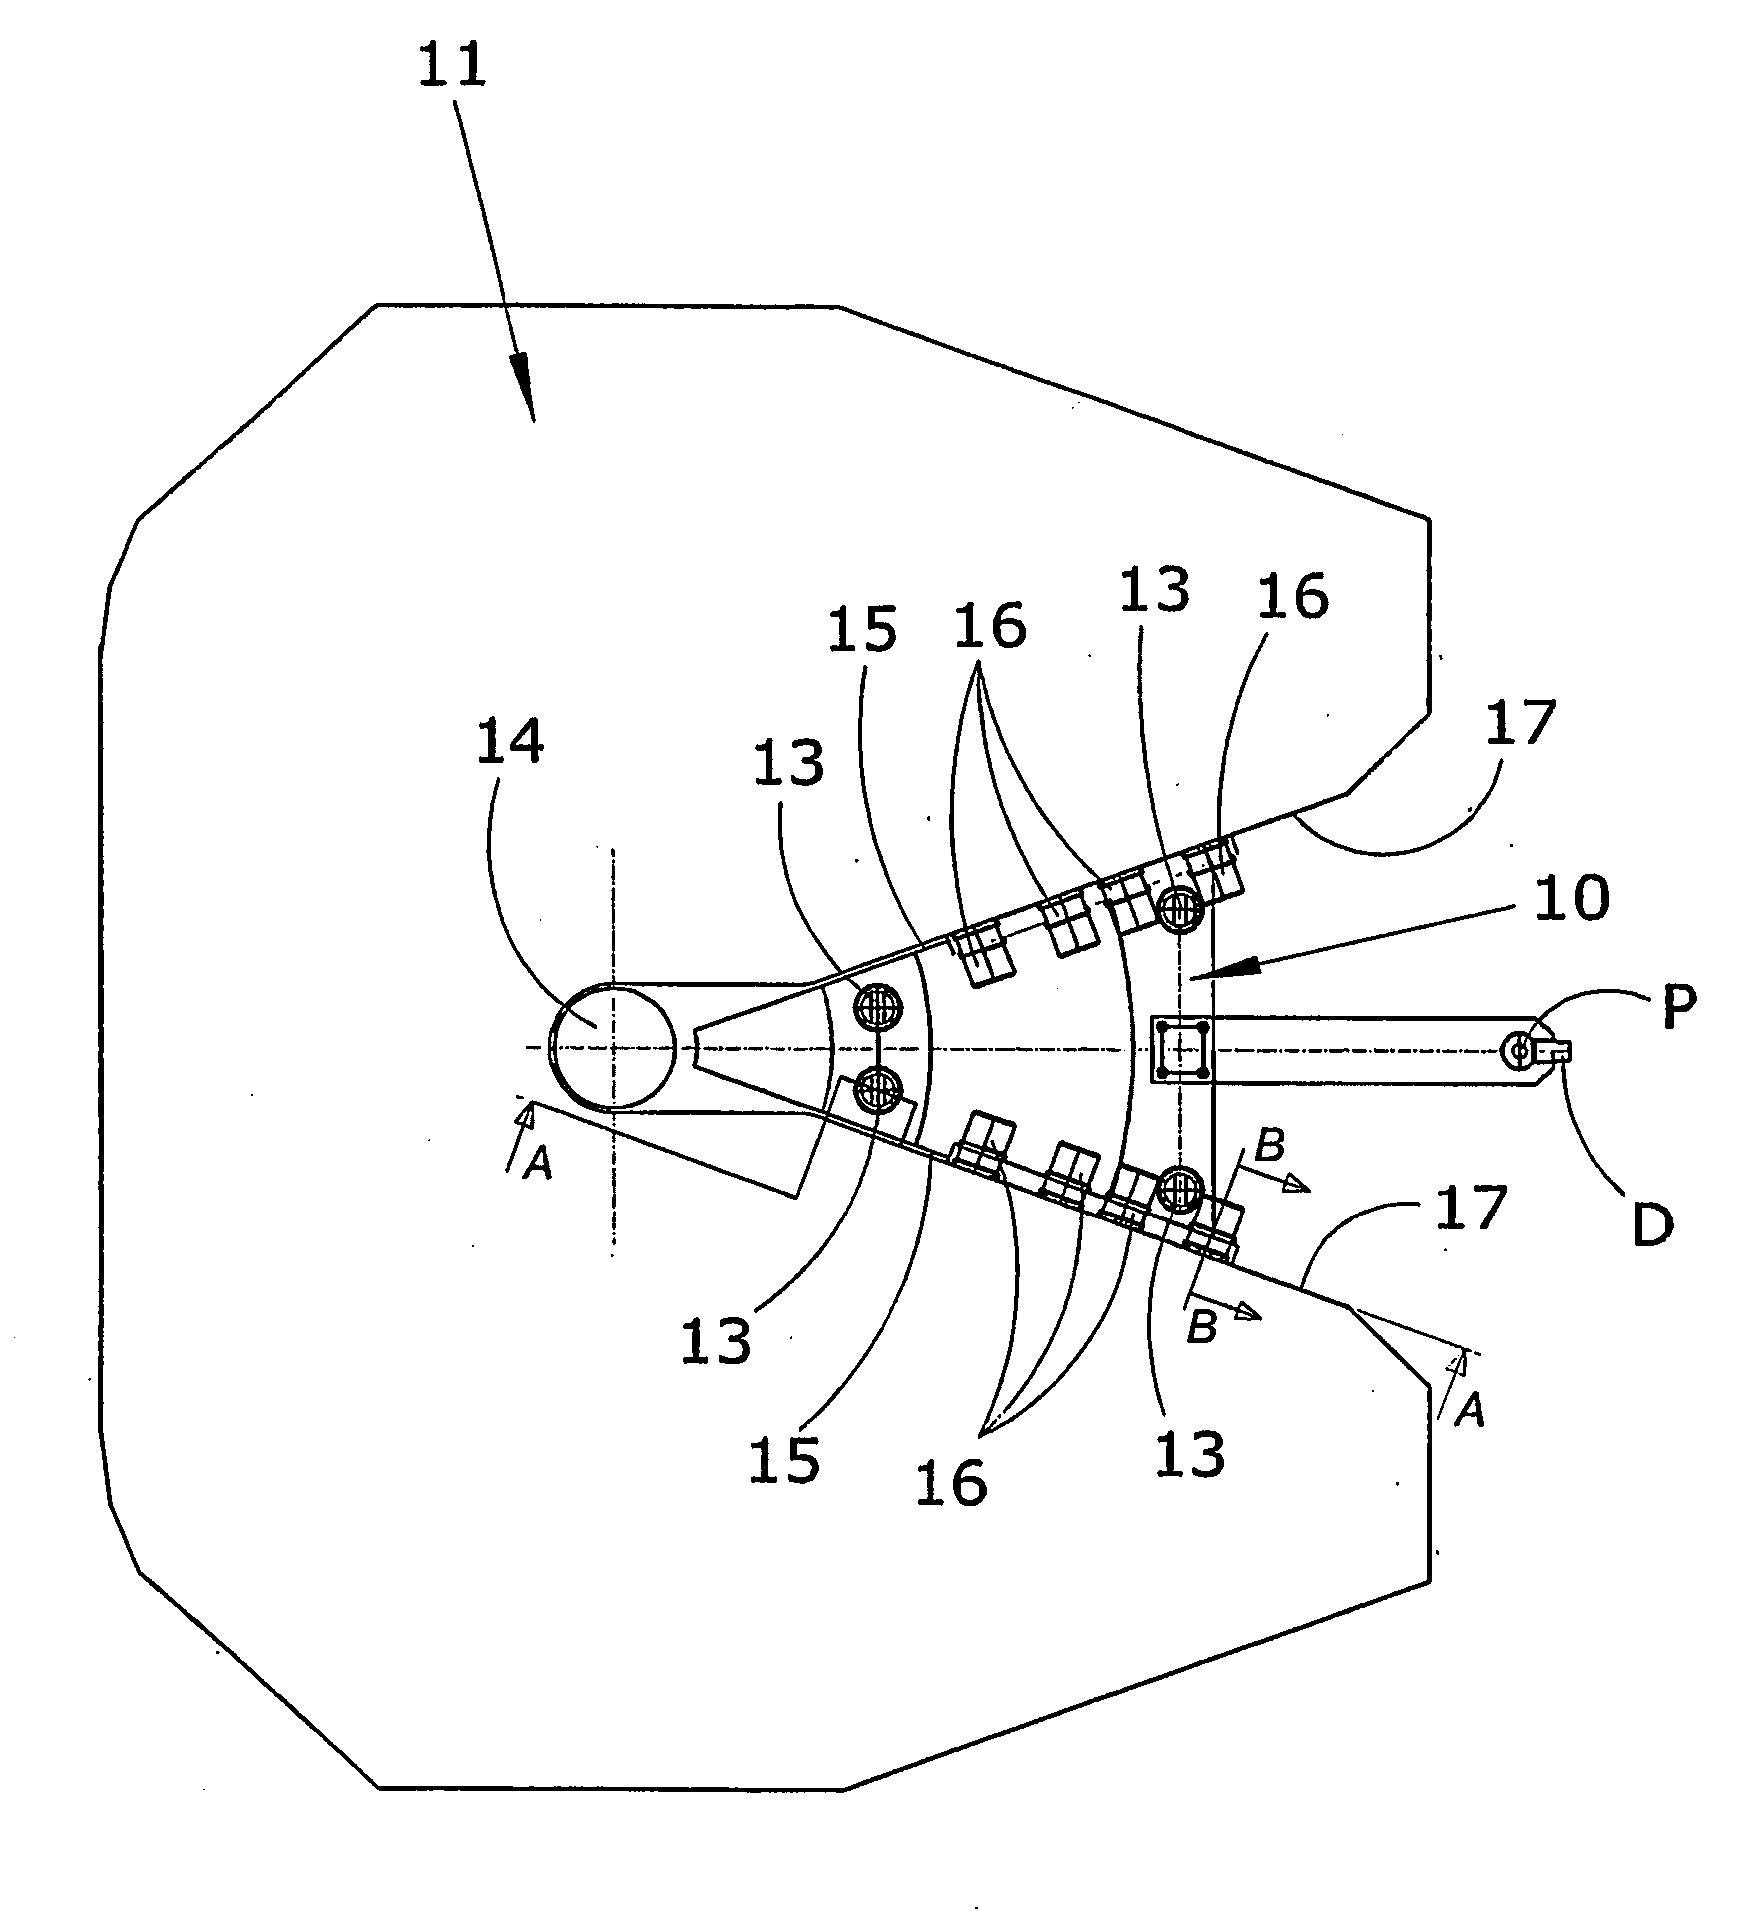 Magnetic wedge device applied to the fifth wheel of trailer or semitrailer vehicles